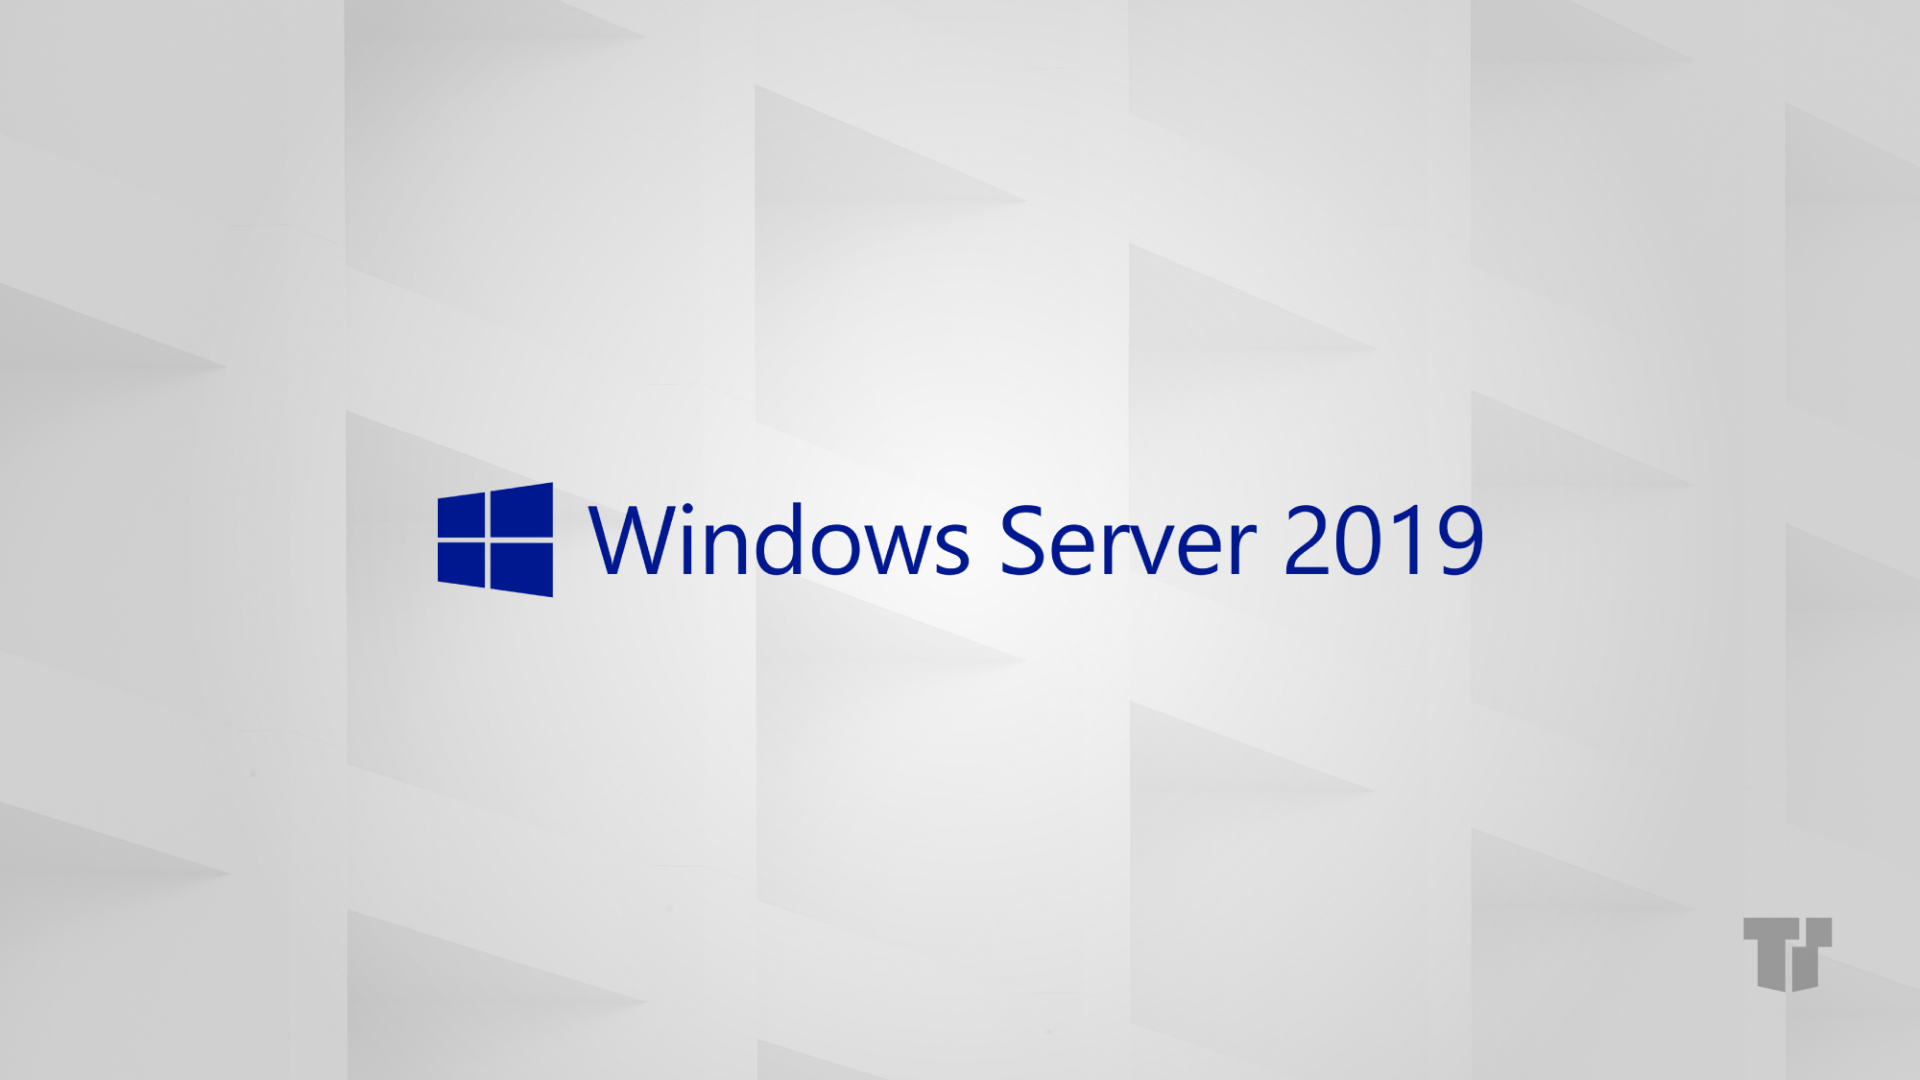 Windows Server 2019: Which Edition Is Best For Your Business? cover image